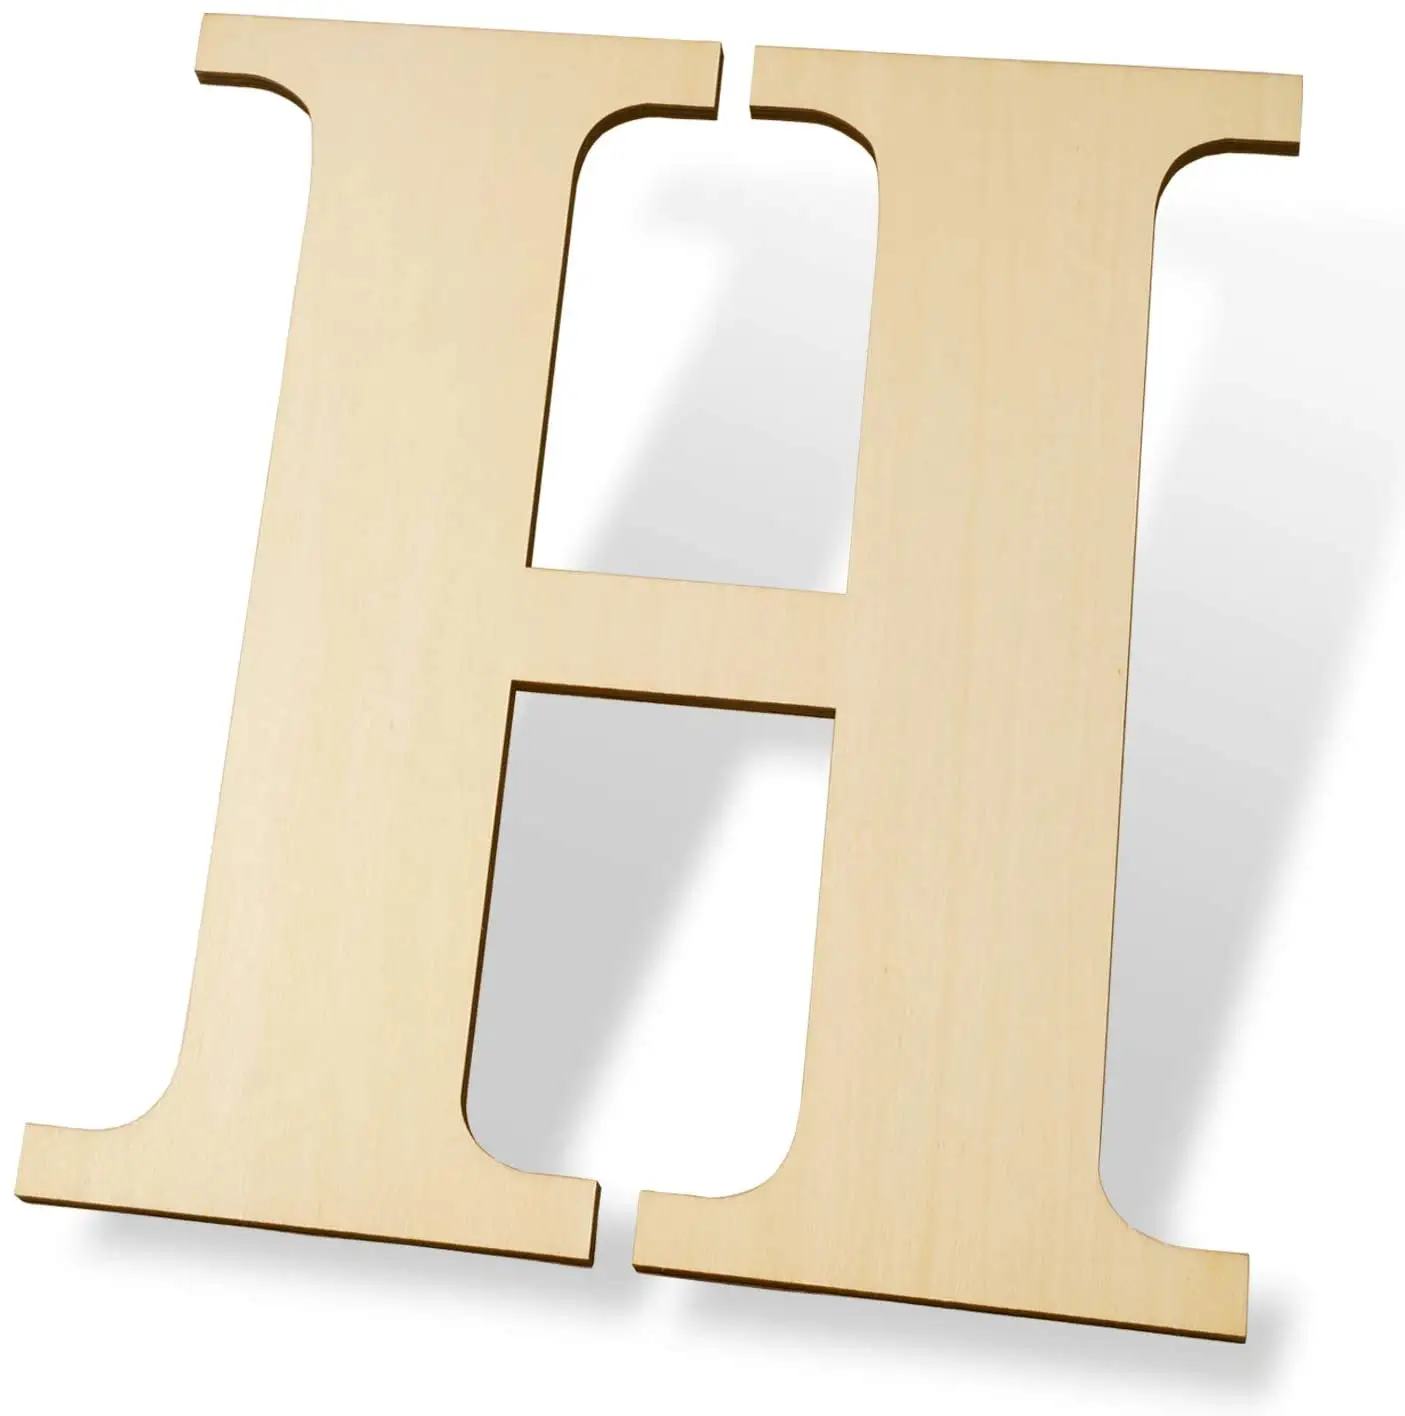 Wooden Letters Blank Wood Board for Walls Decor, Party, DIY Craft Projects